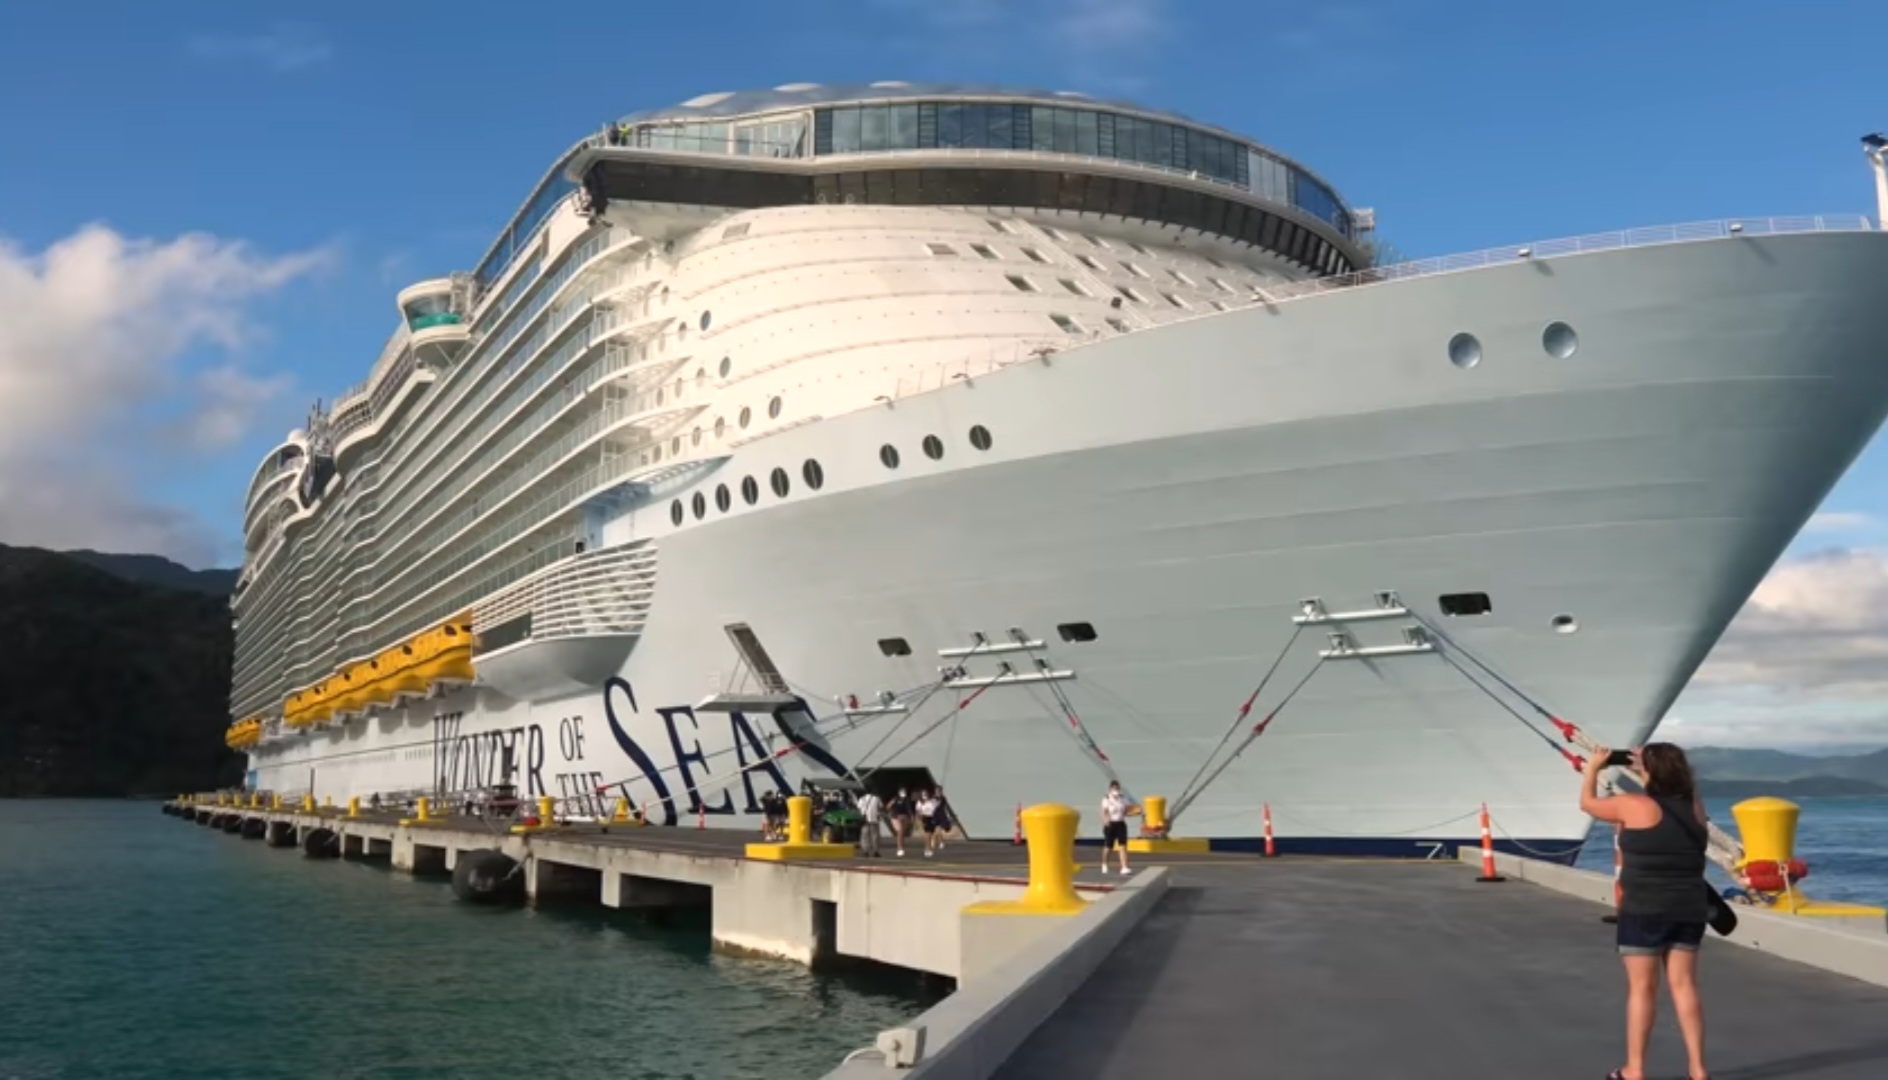 Tour Around The Largest Ship In The World: Wonder of the seas